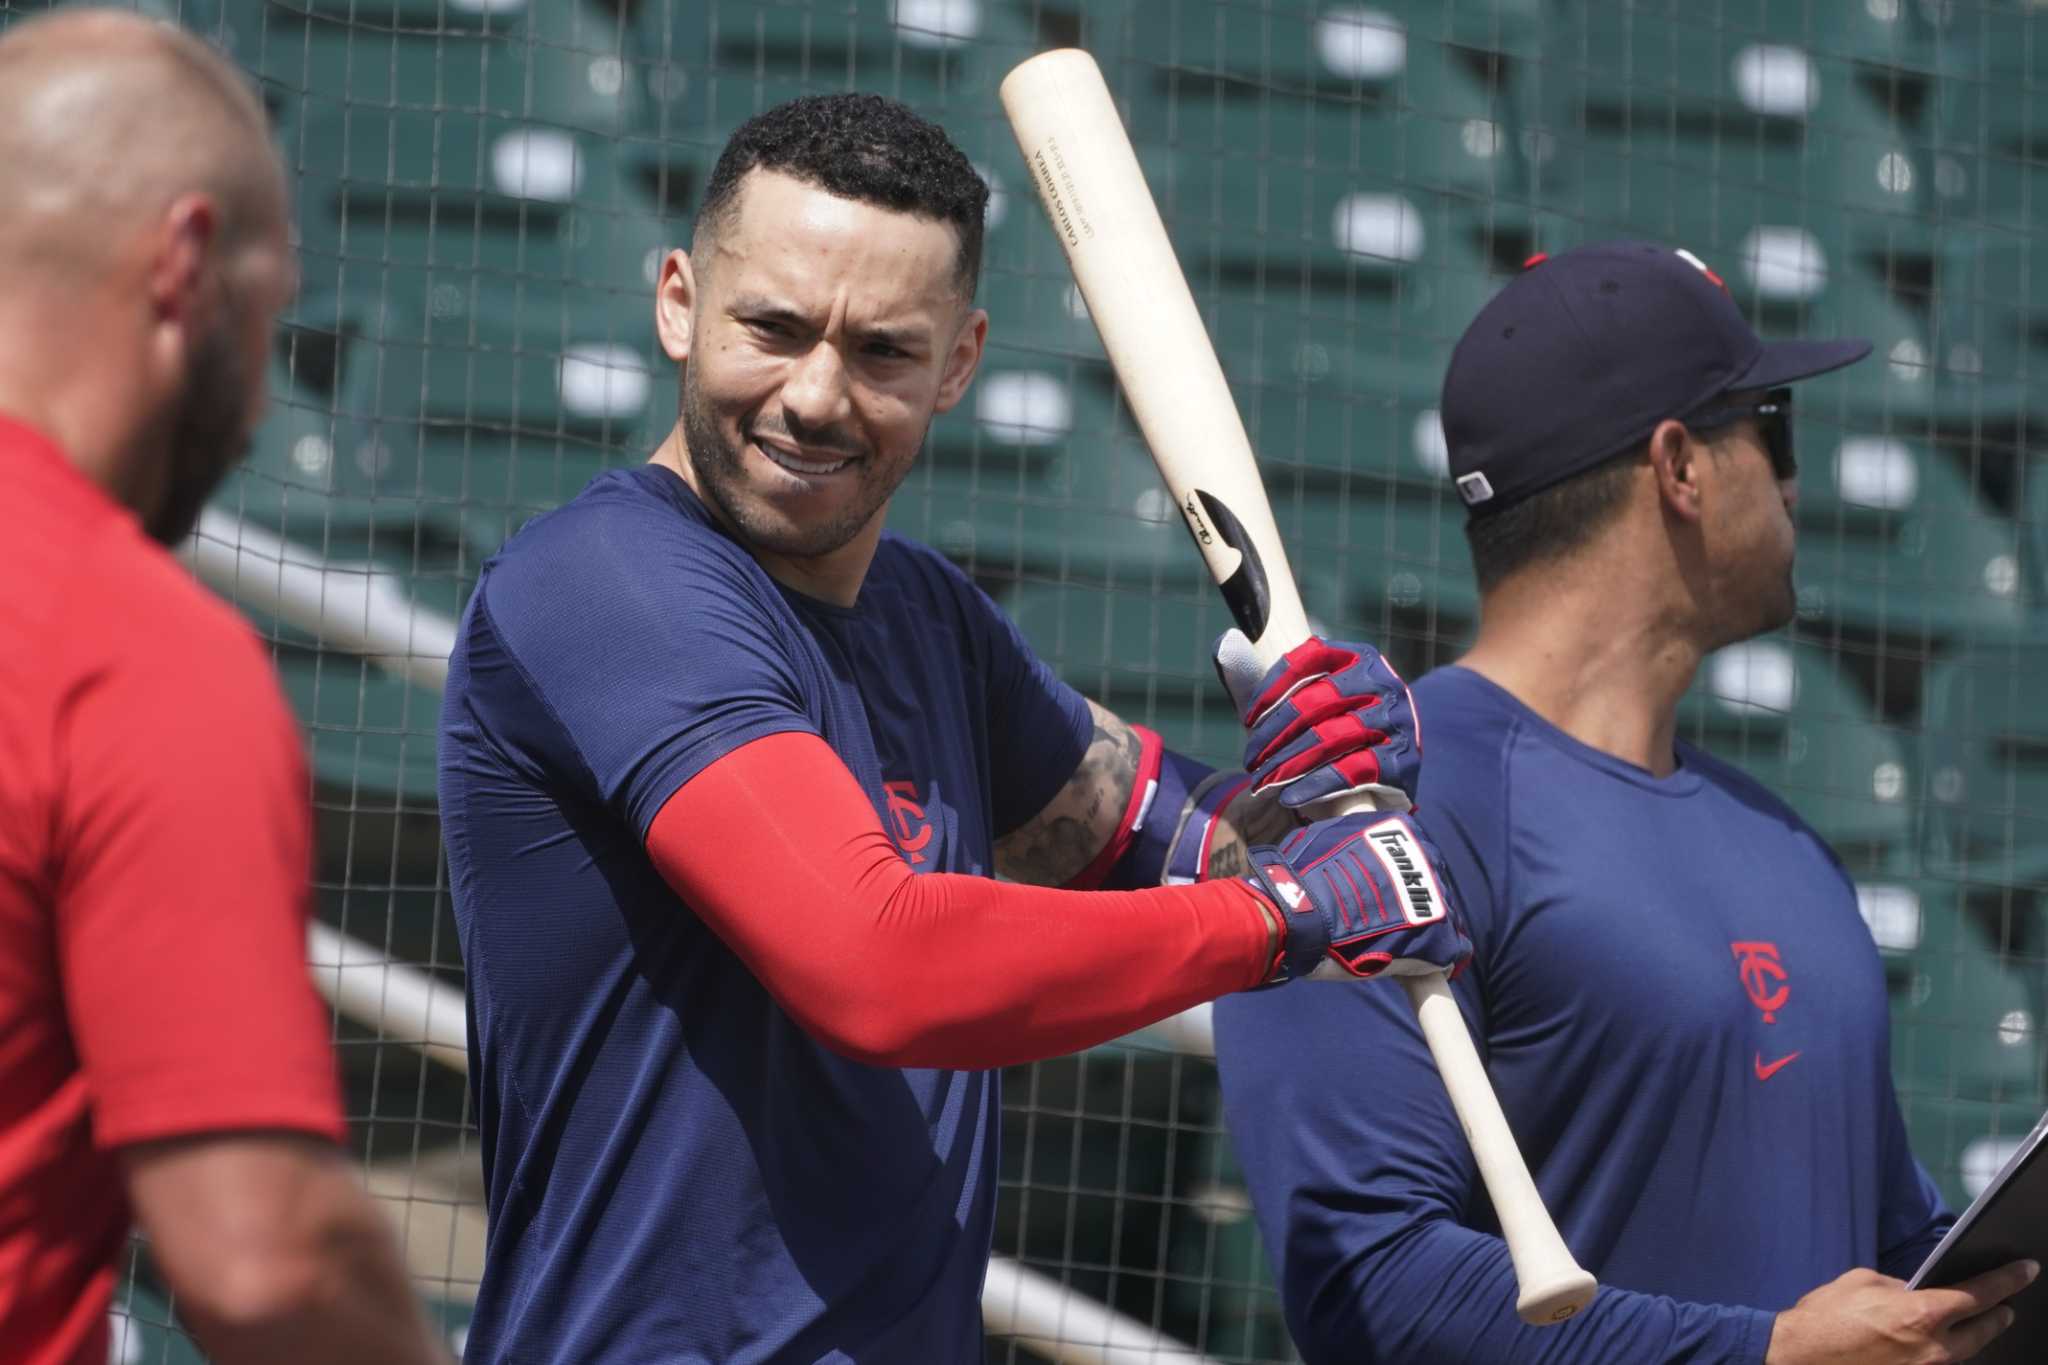 Watch Carlos Correa's press conference with the Twins here